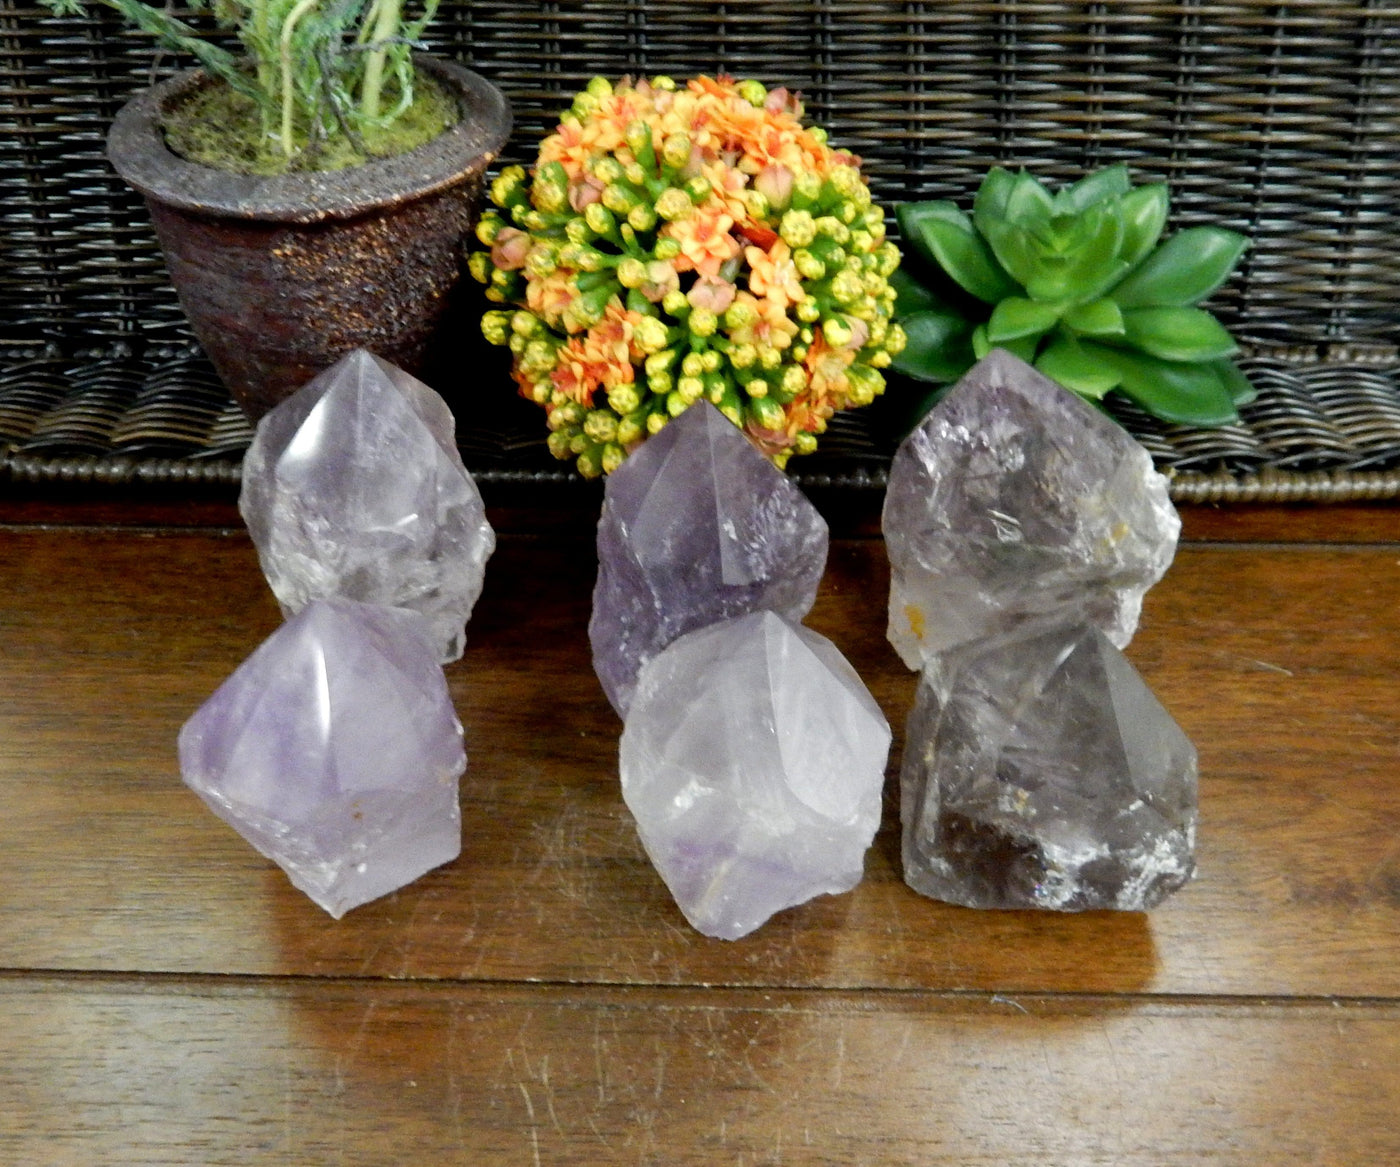 6 Raw Amethyst Semi Polished Points on wooden table with various decorations in the background